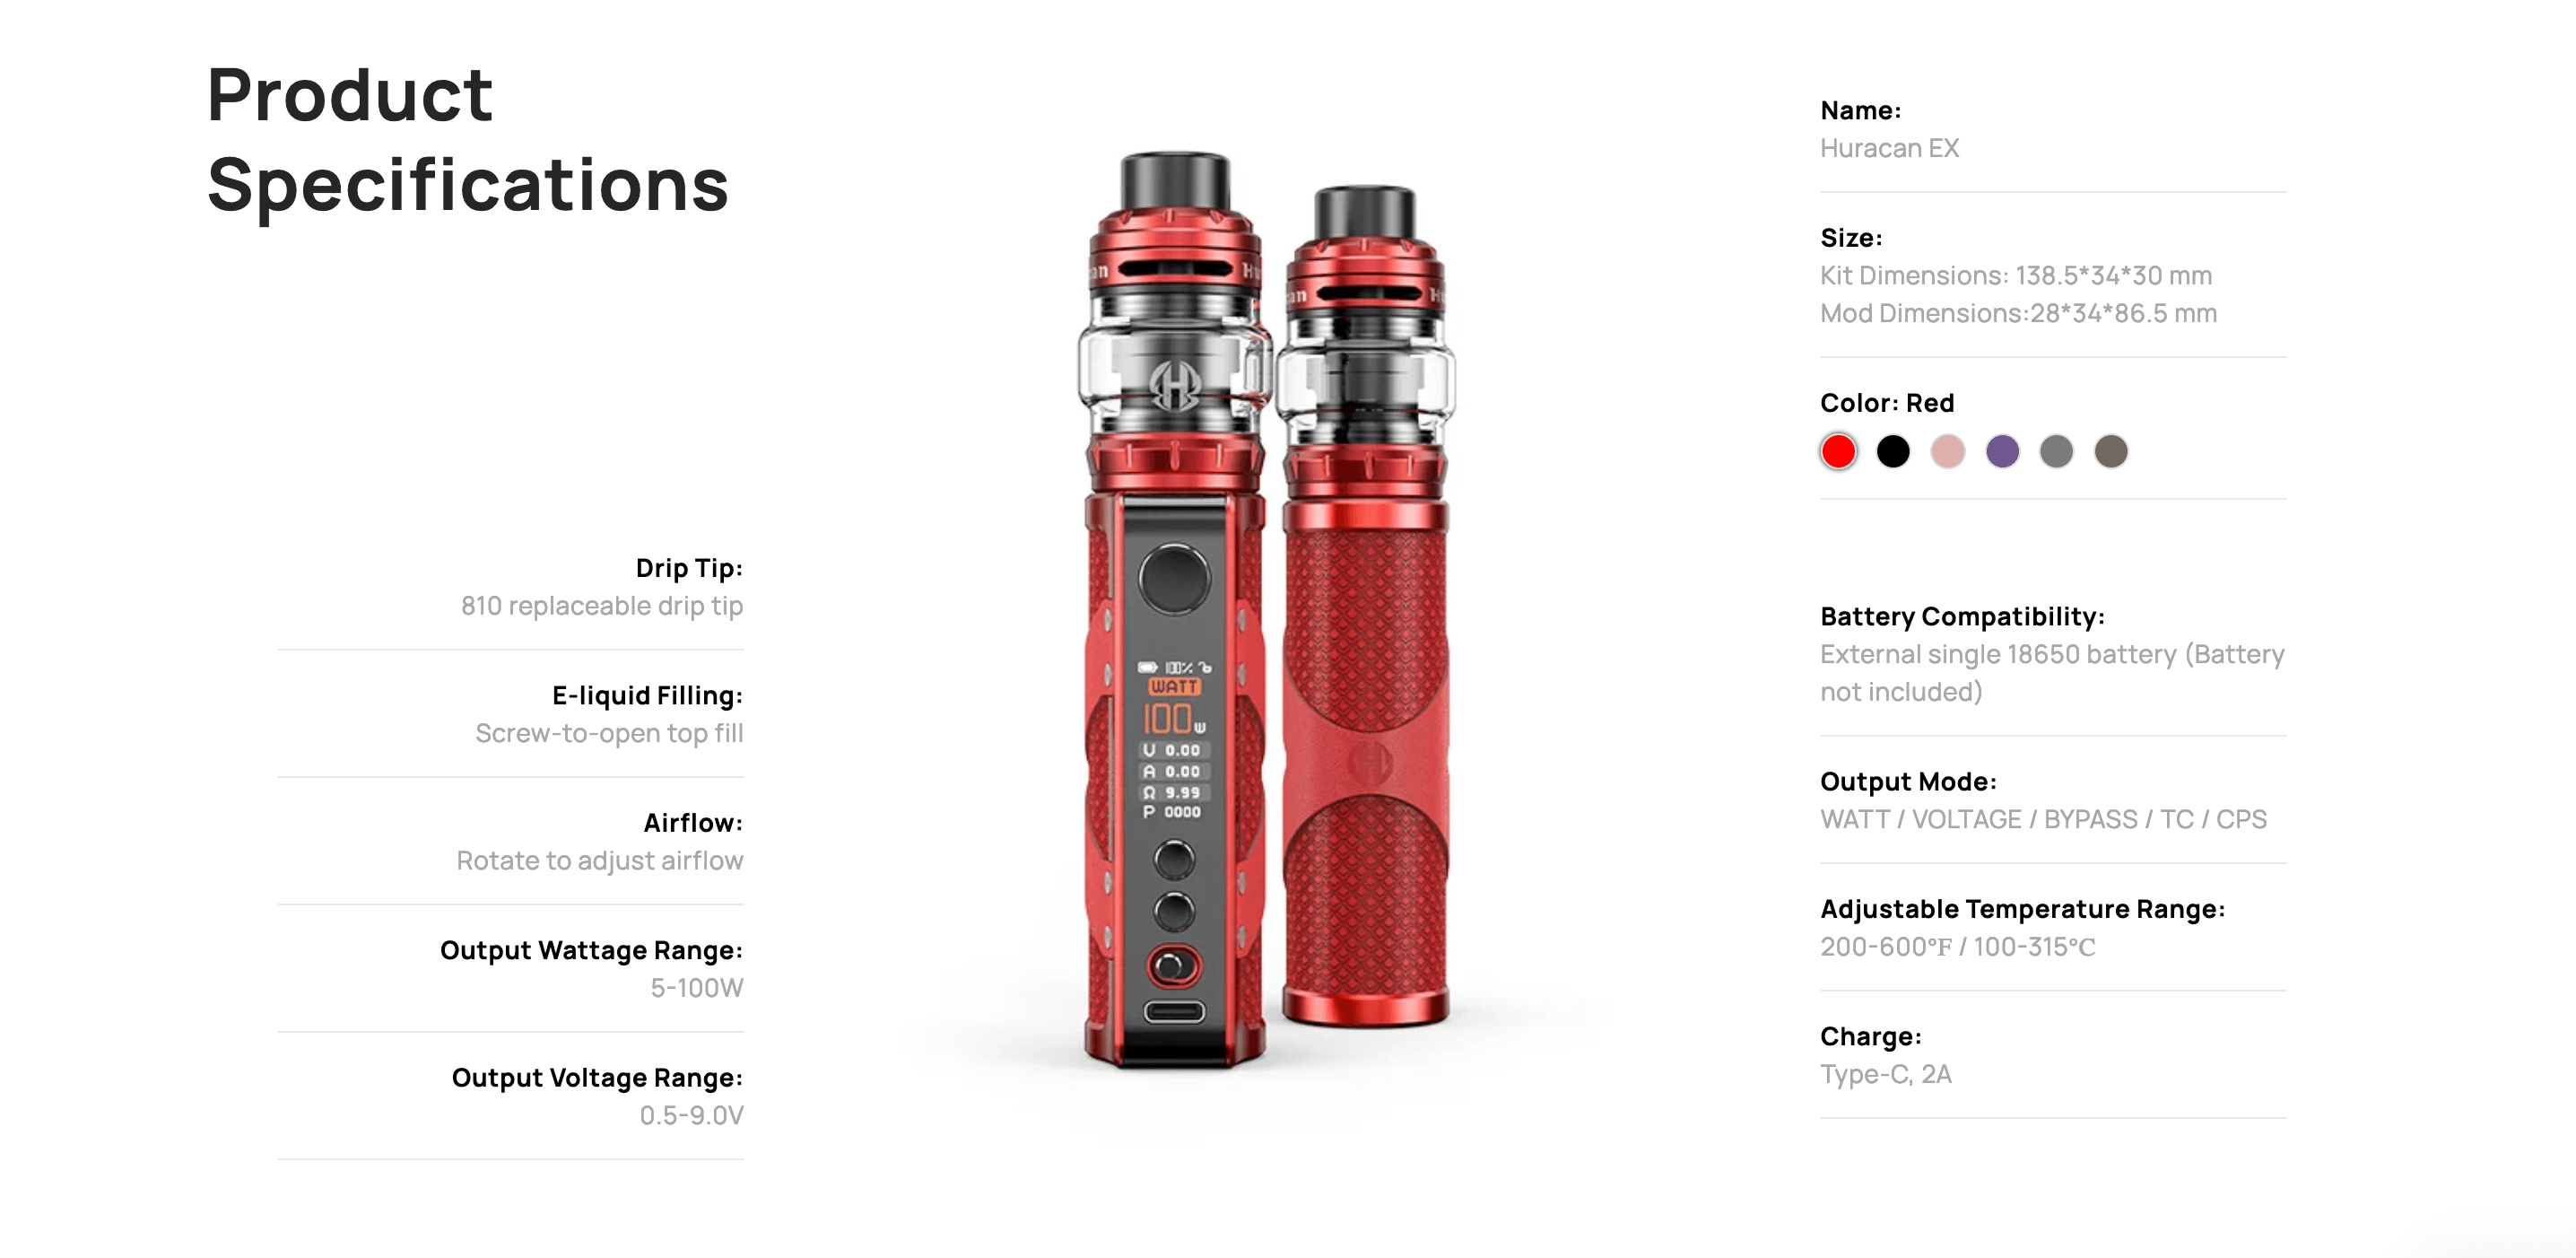 Aspire Huracan EX Vape Kit - Product Specifications